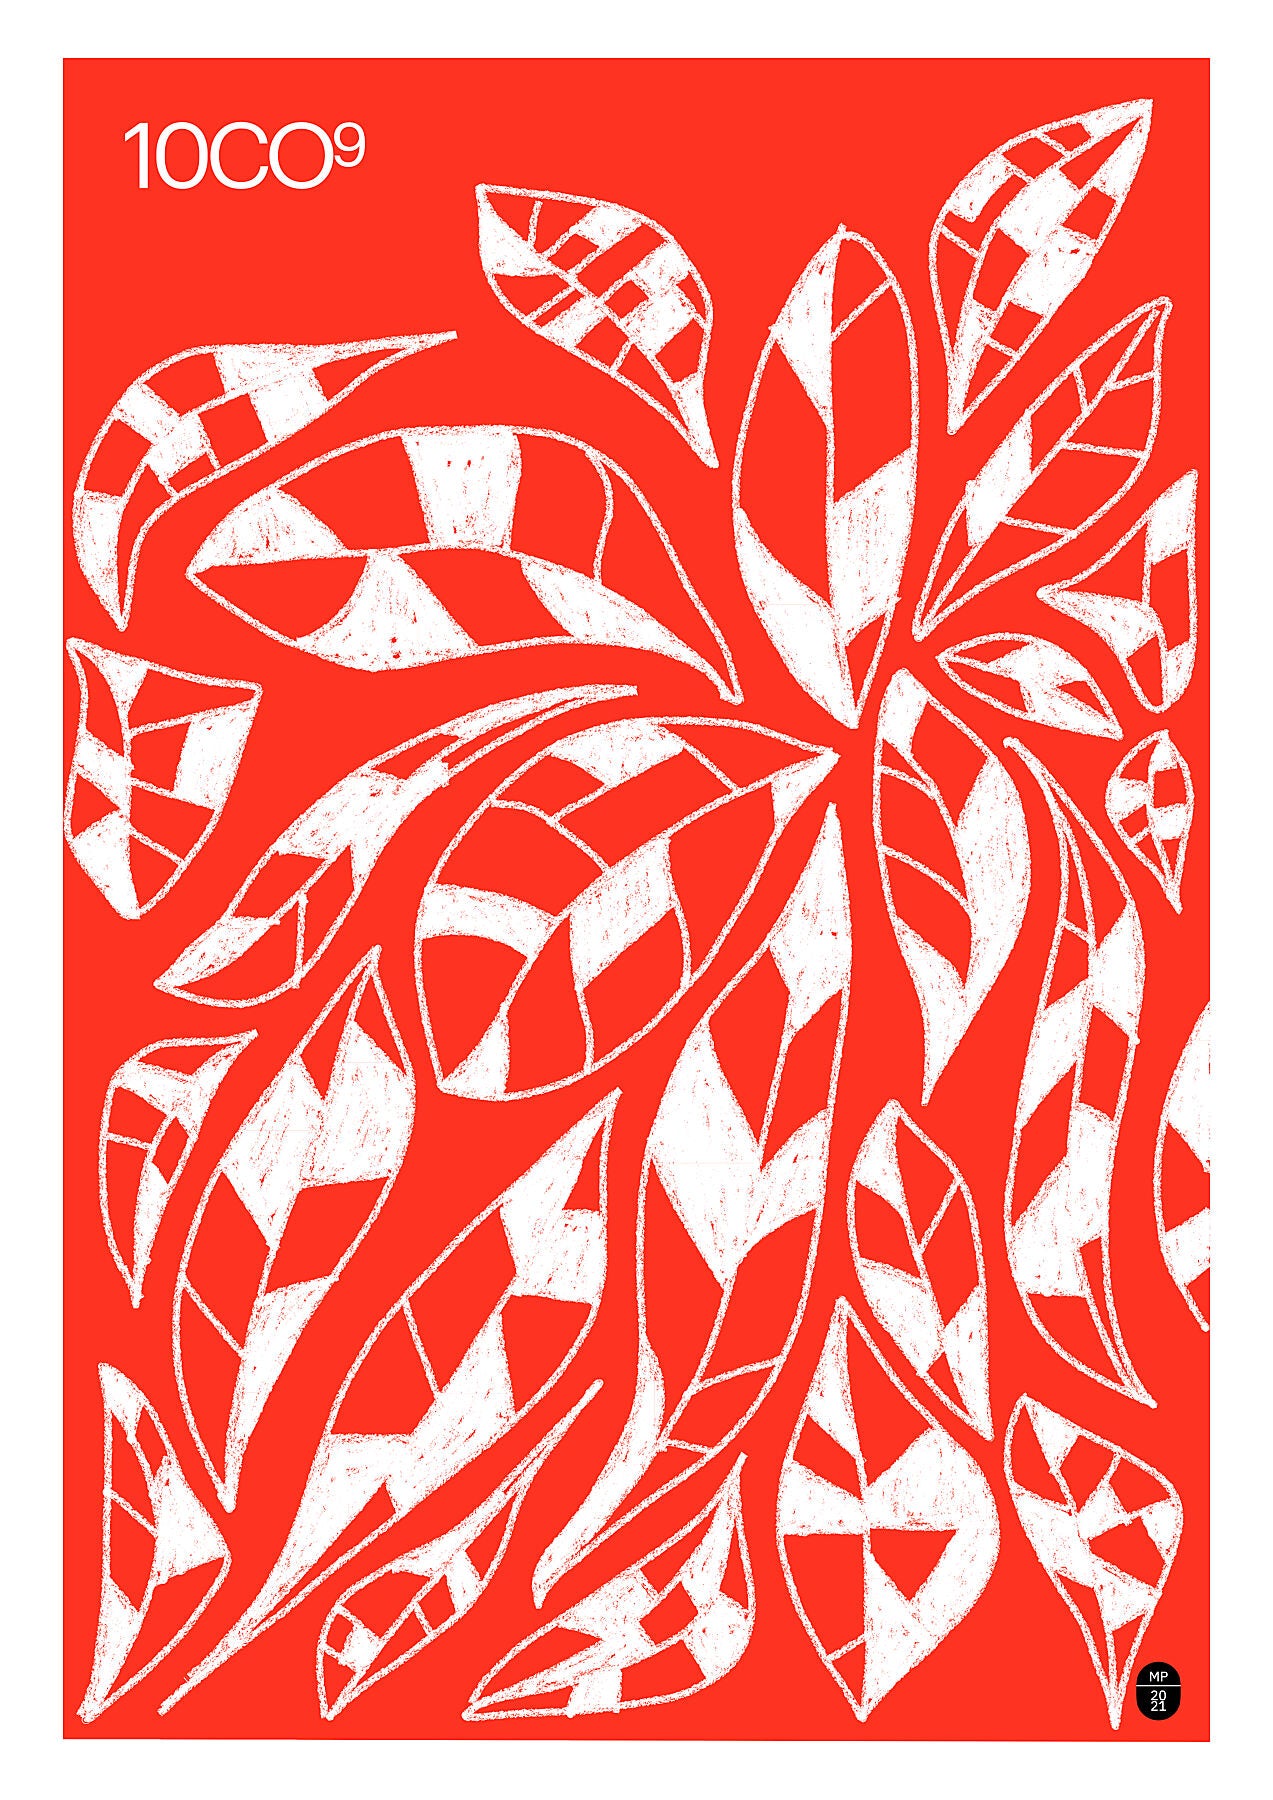 Handwritten leaves in white on a red background, available in C-Type print on Fuji Matt Crystal archive paper with a semi-matt finish. - Starting from 19 € / Shipped Worldwide